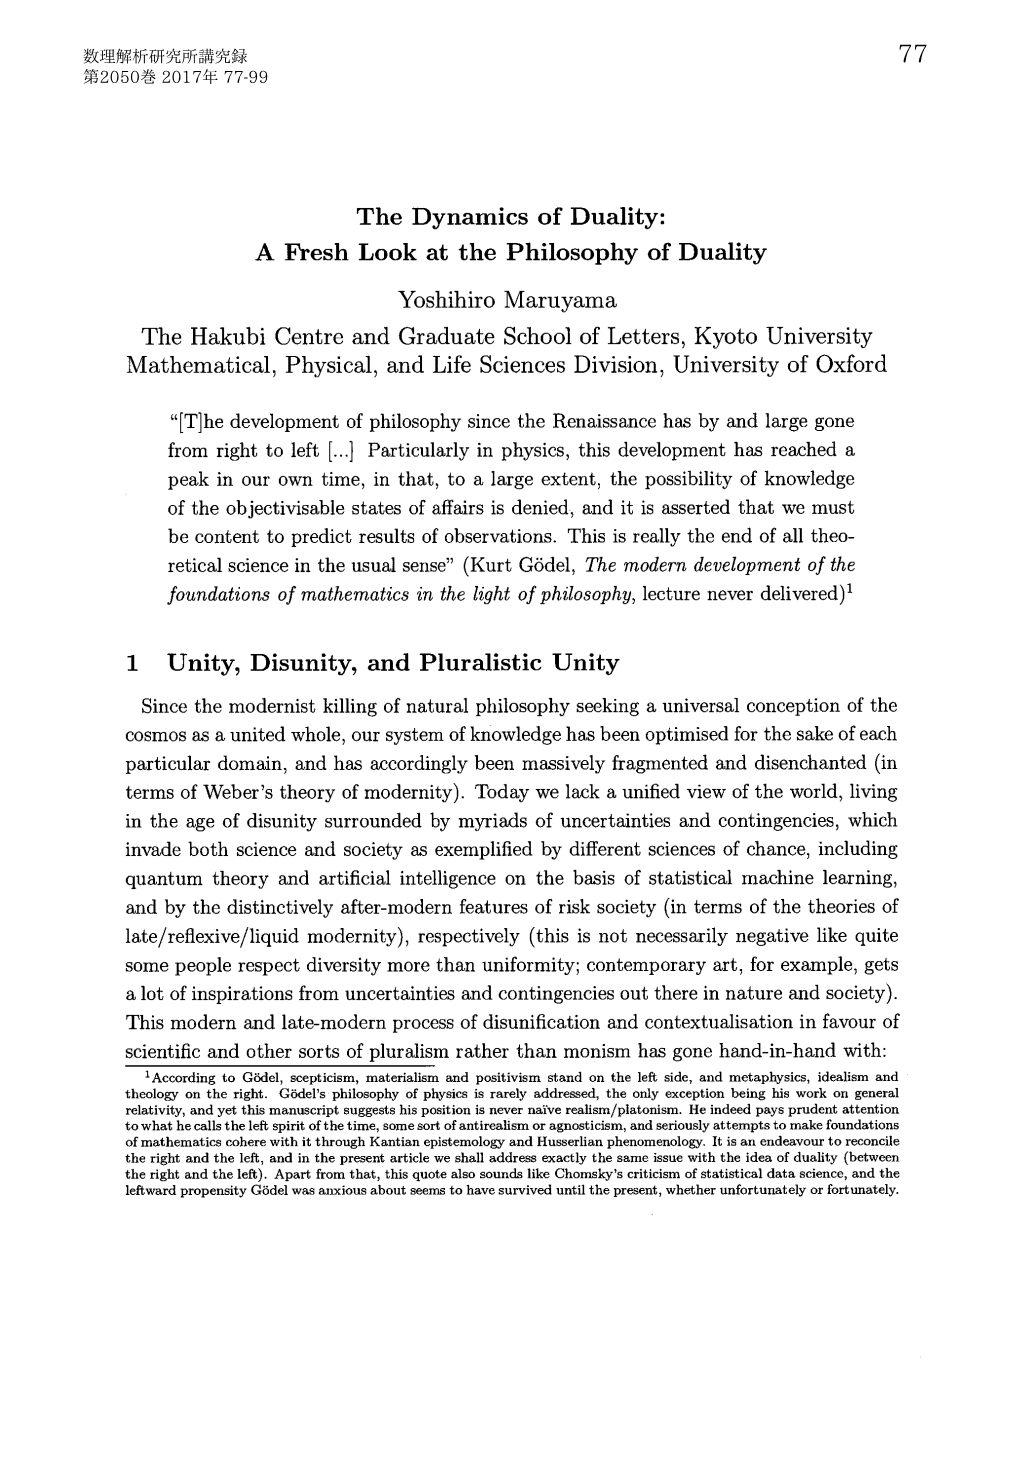 The Dynamics of Duality: a Fresh Look at the Philosophy of Duality